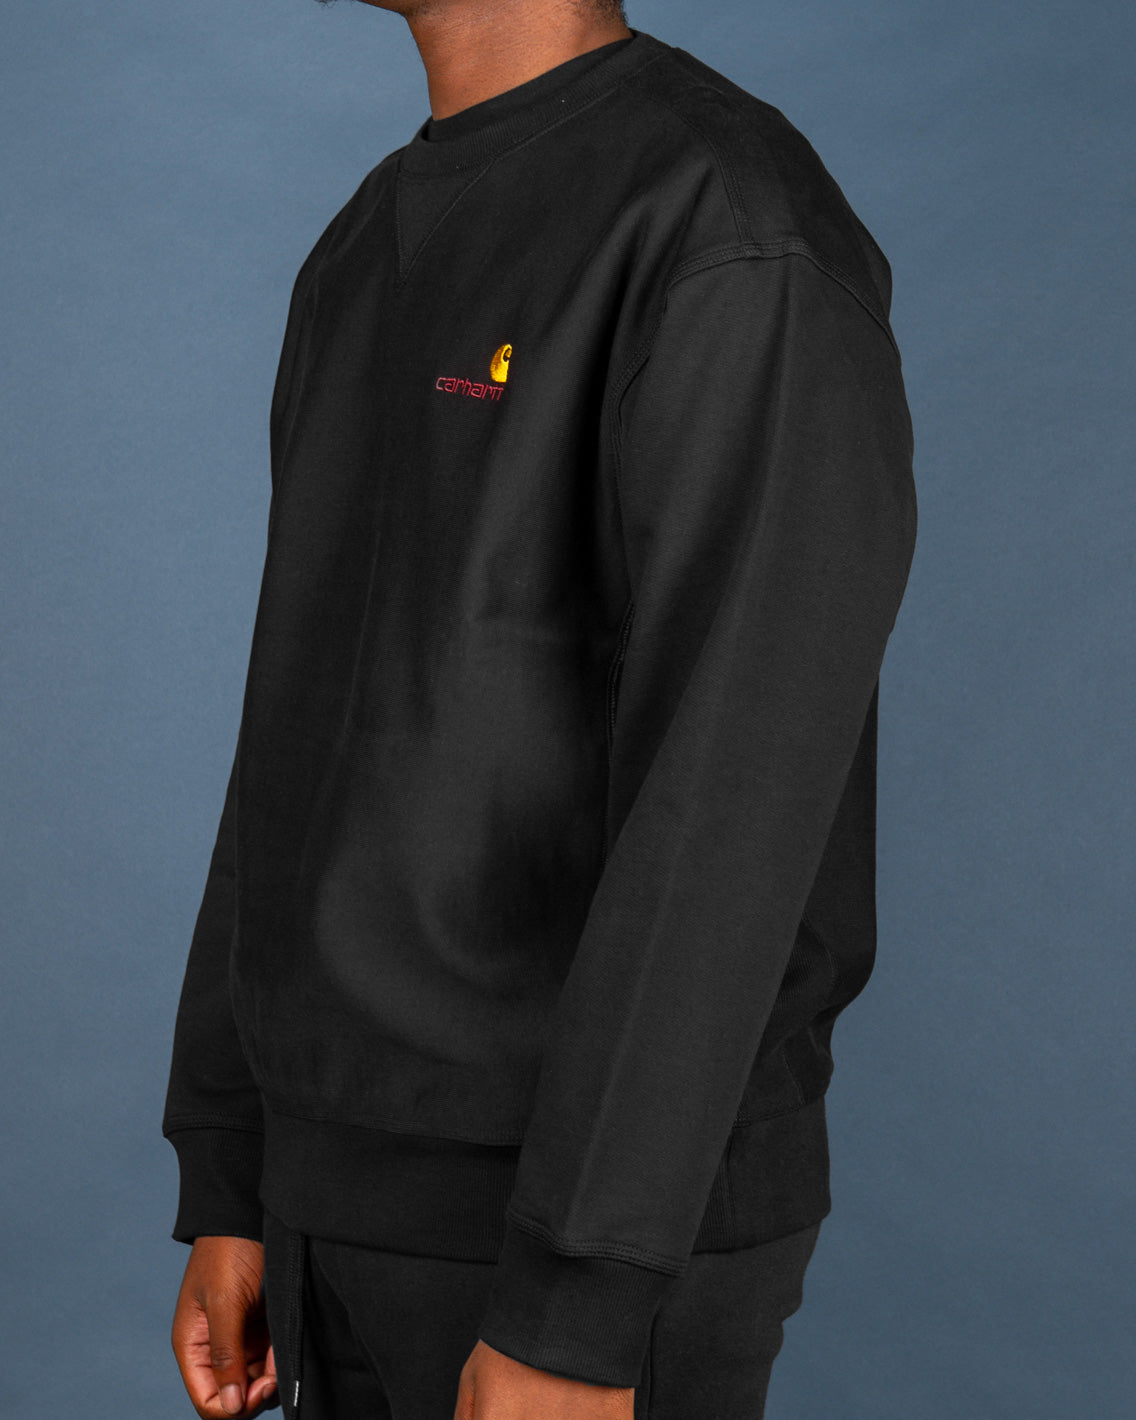 Carhartt WIP brings simply and effortless styling with the American Script Sweat in Black. This black crewneck is made from a premium cotton fleece back jersey blend and features comfortable ribbed trims. Signed off with the iconic Carhartt logo embroidered on the chest.